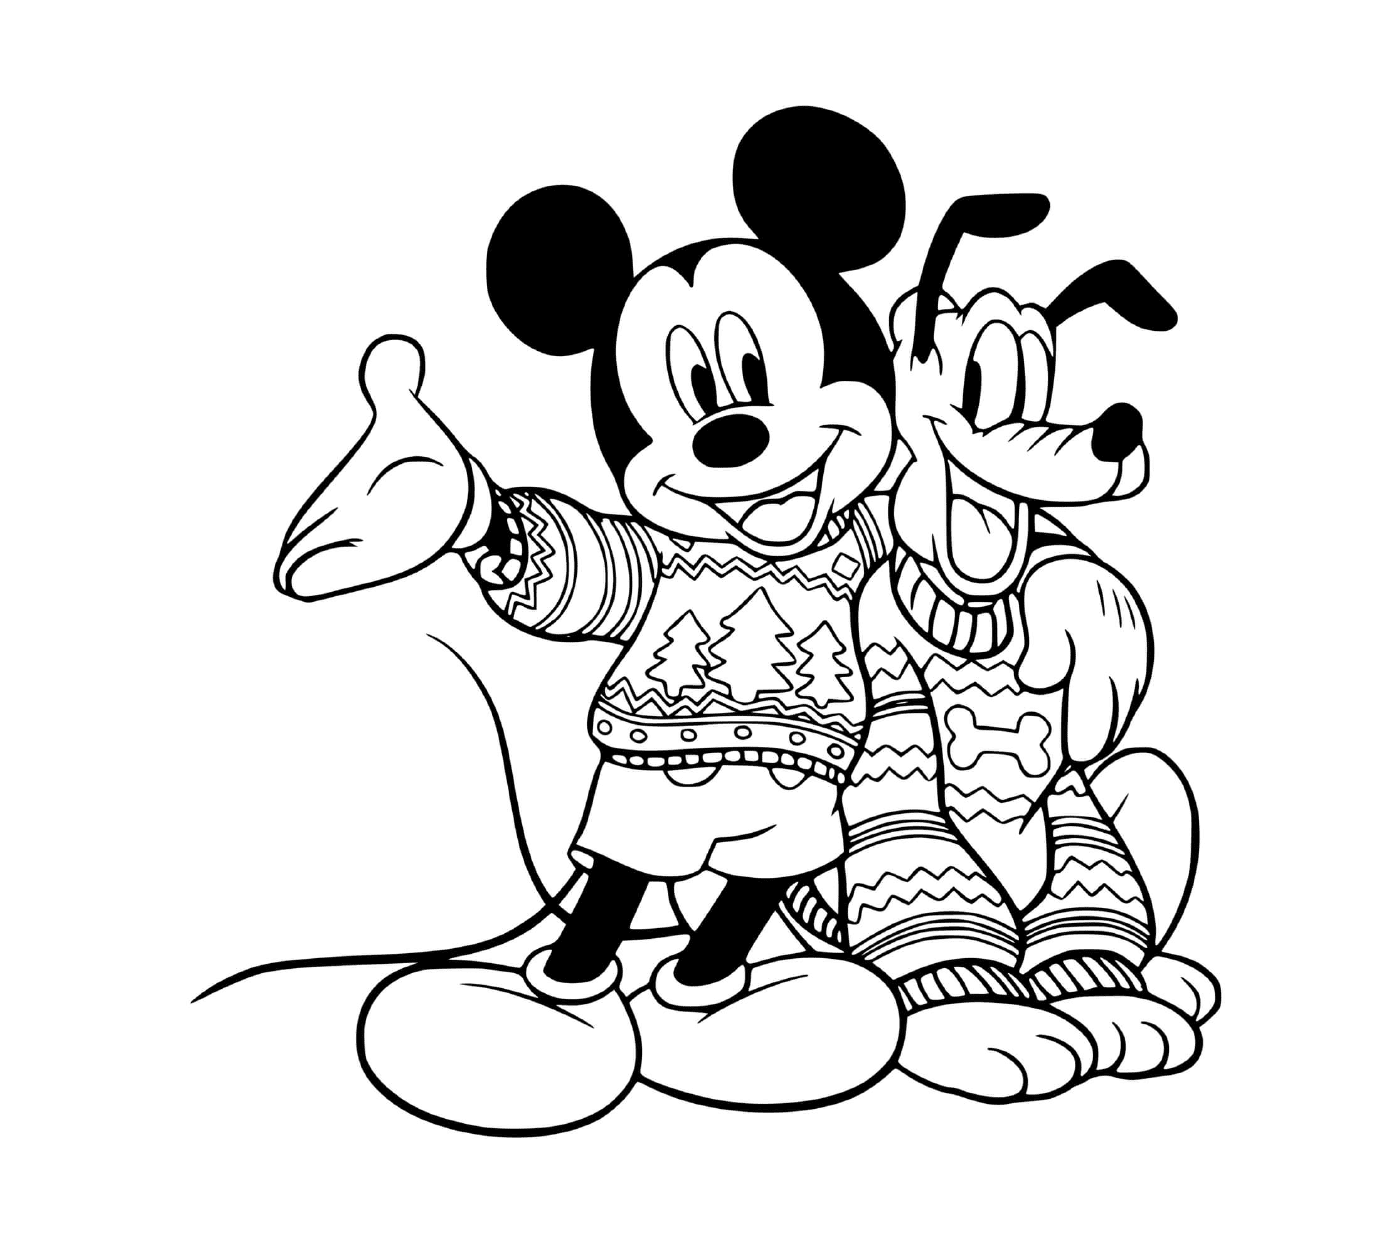  Mickey and Pluto in sweaters 